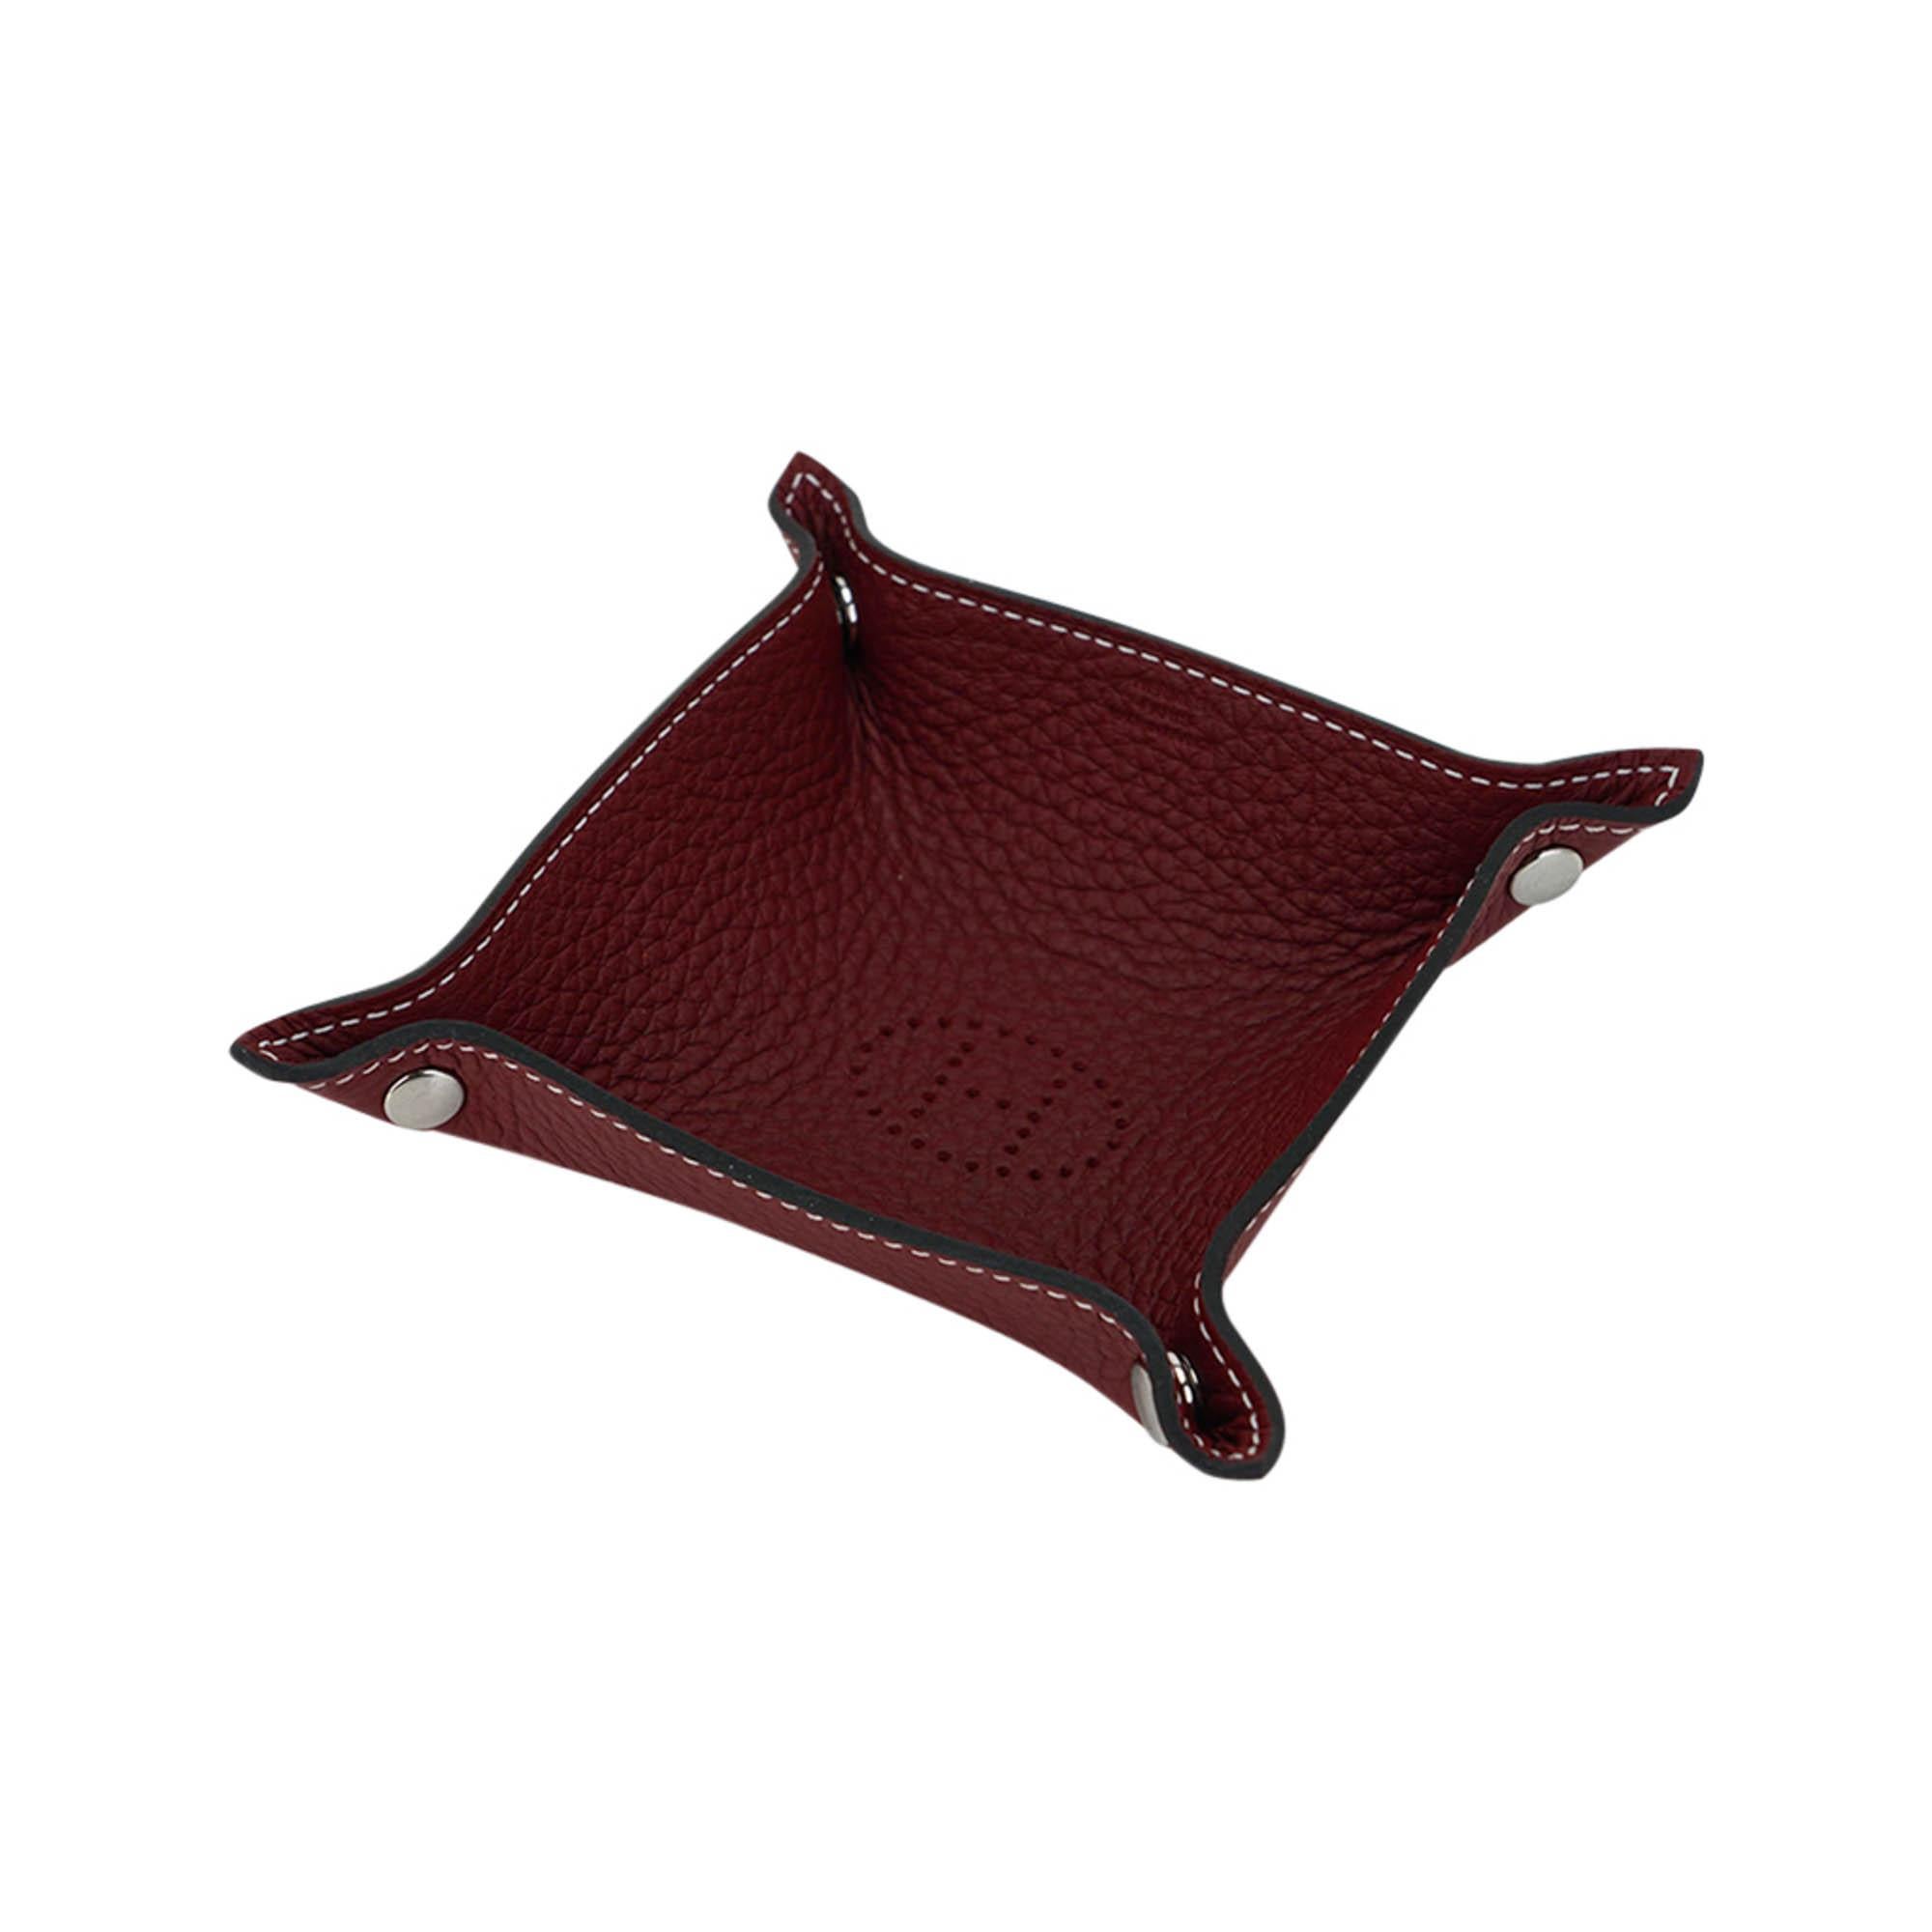 Mightychic offers an Hermes Mises et Relances mini change tray featured in Rouge H.
Beautifully crafted in Clemence taurillon leather.
Palladium clou de selle snaps.
Perforated Evelyne H design in center.
Signature saddle stitch edges in bone.
A